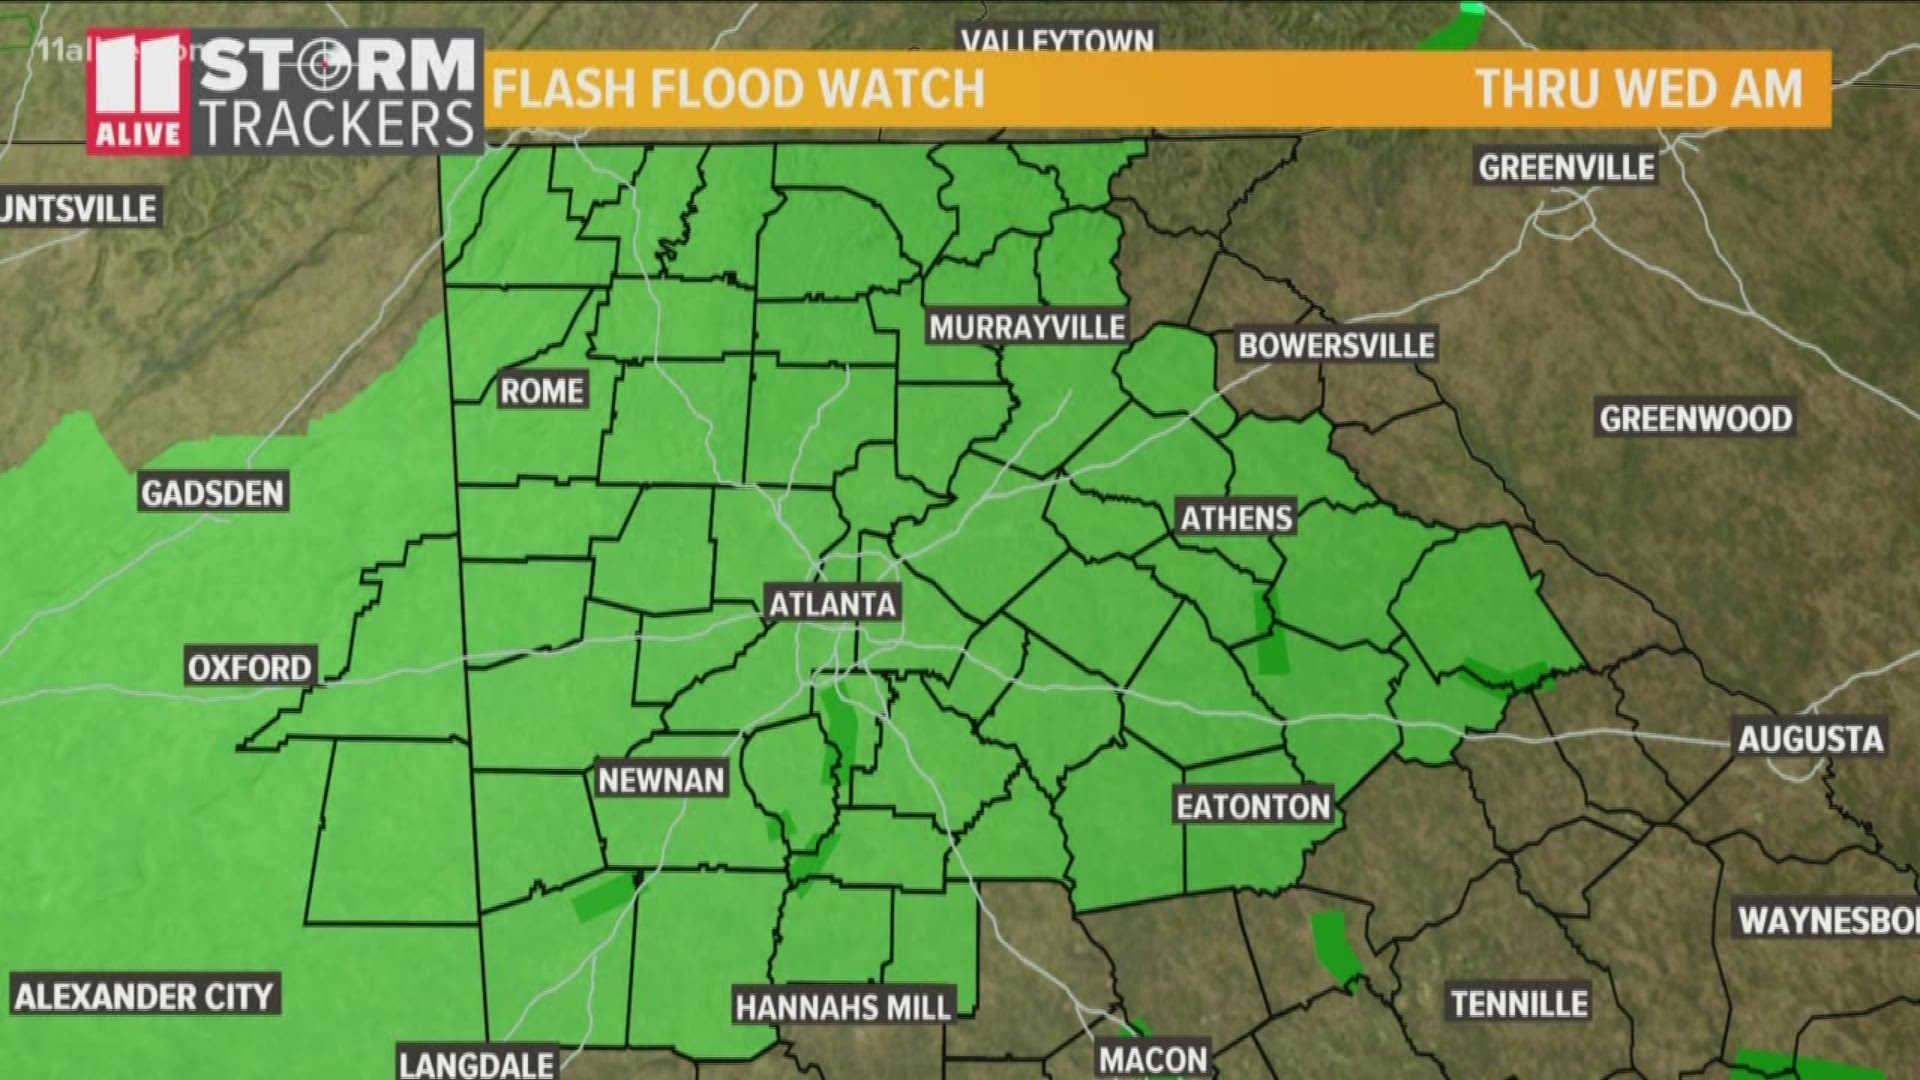 A flash flood watch that remains in effect through Wednesday morning.